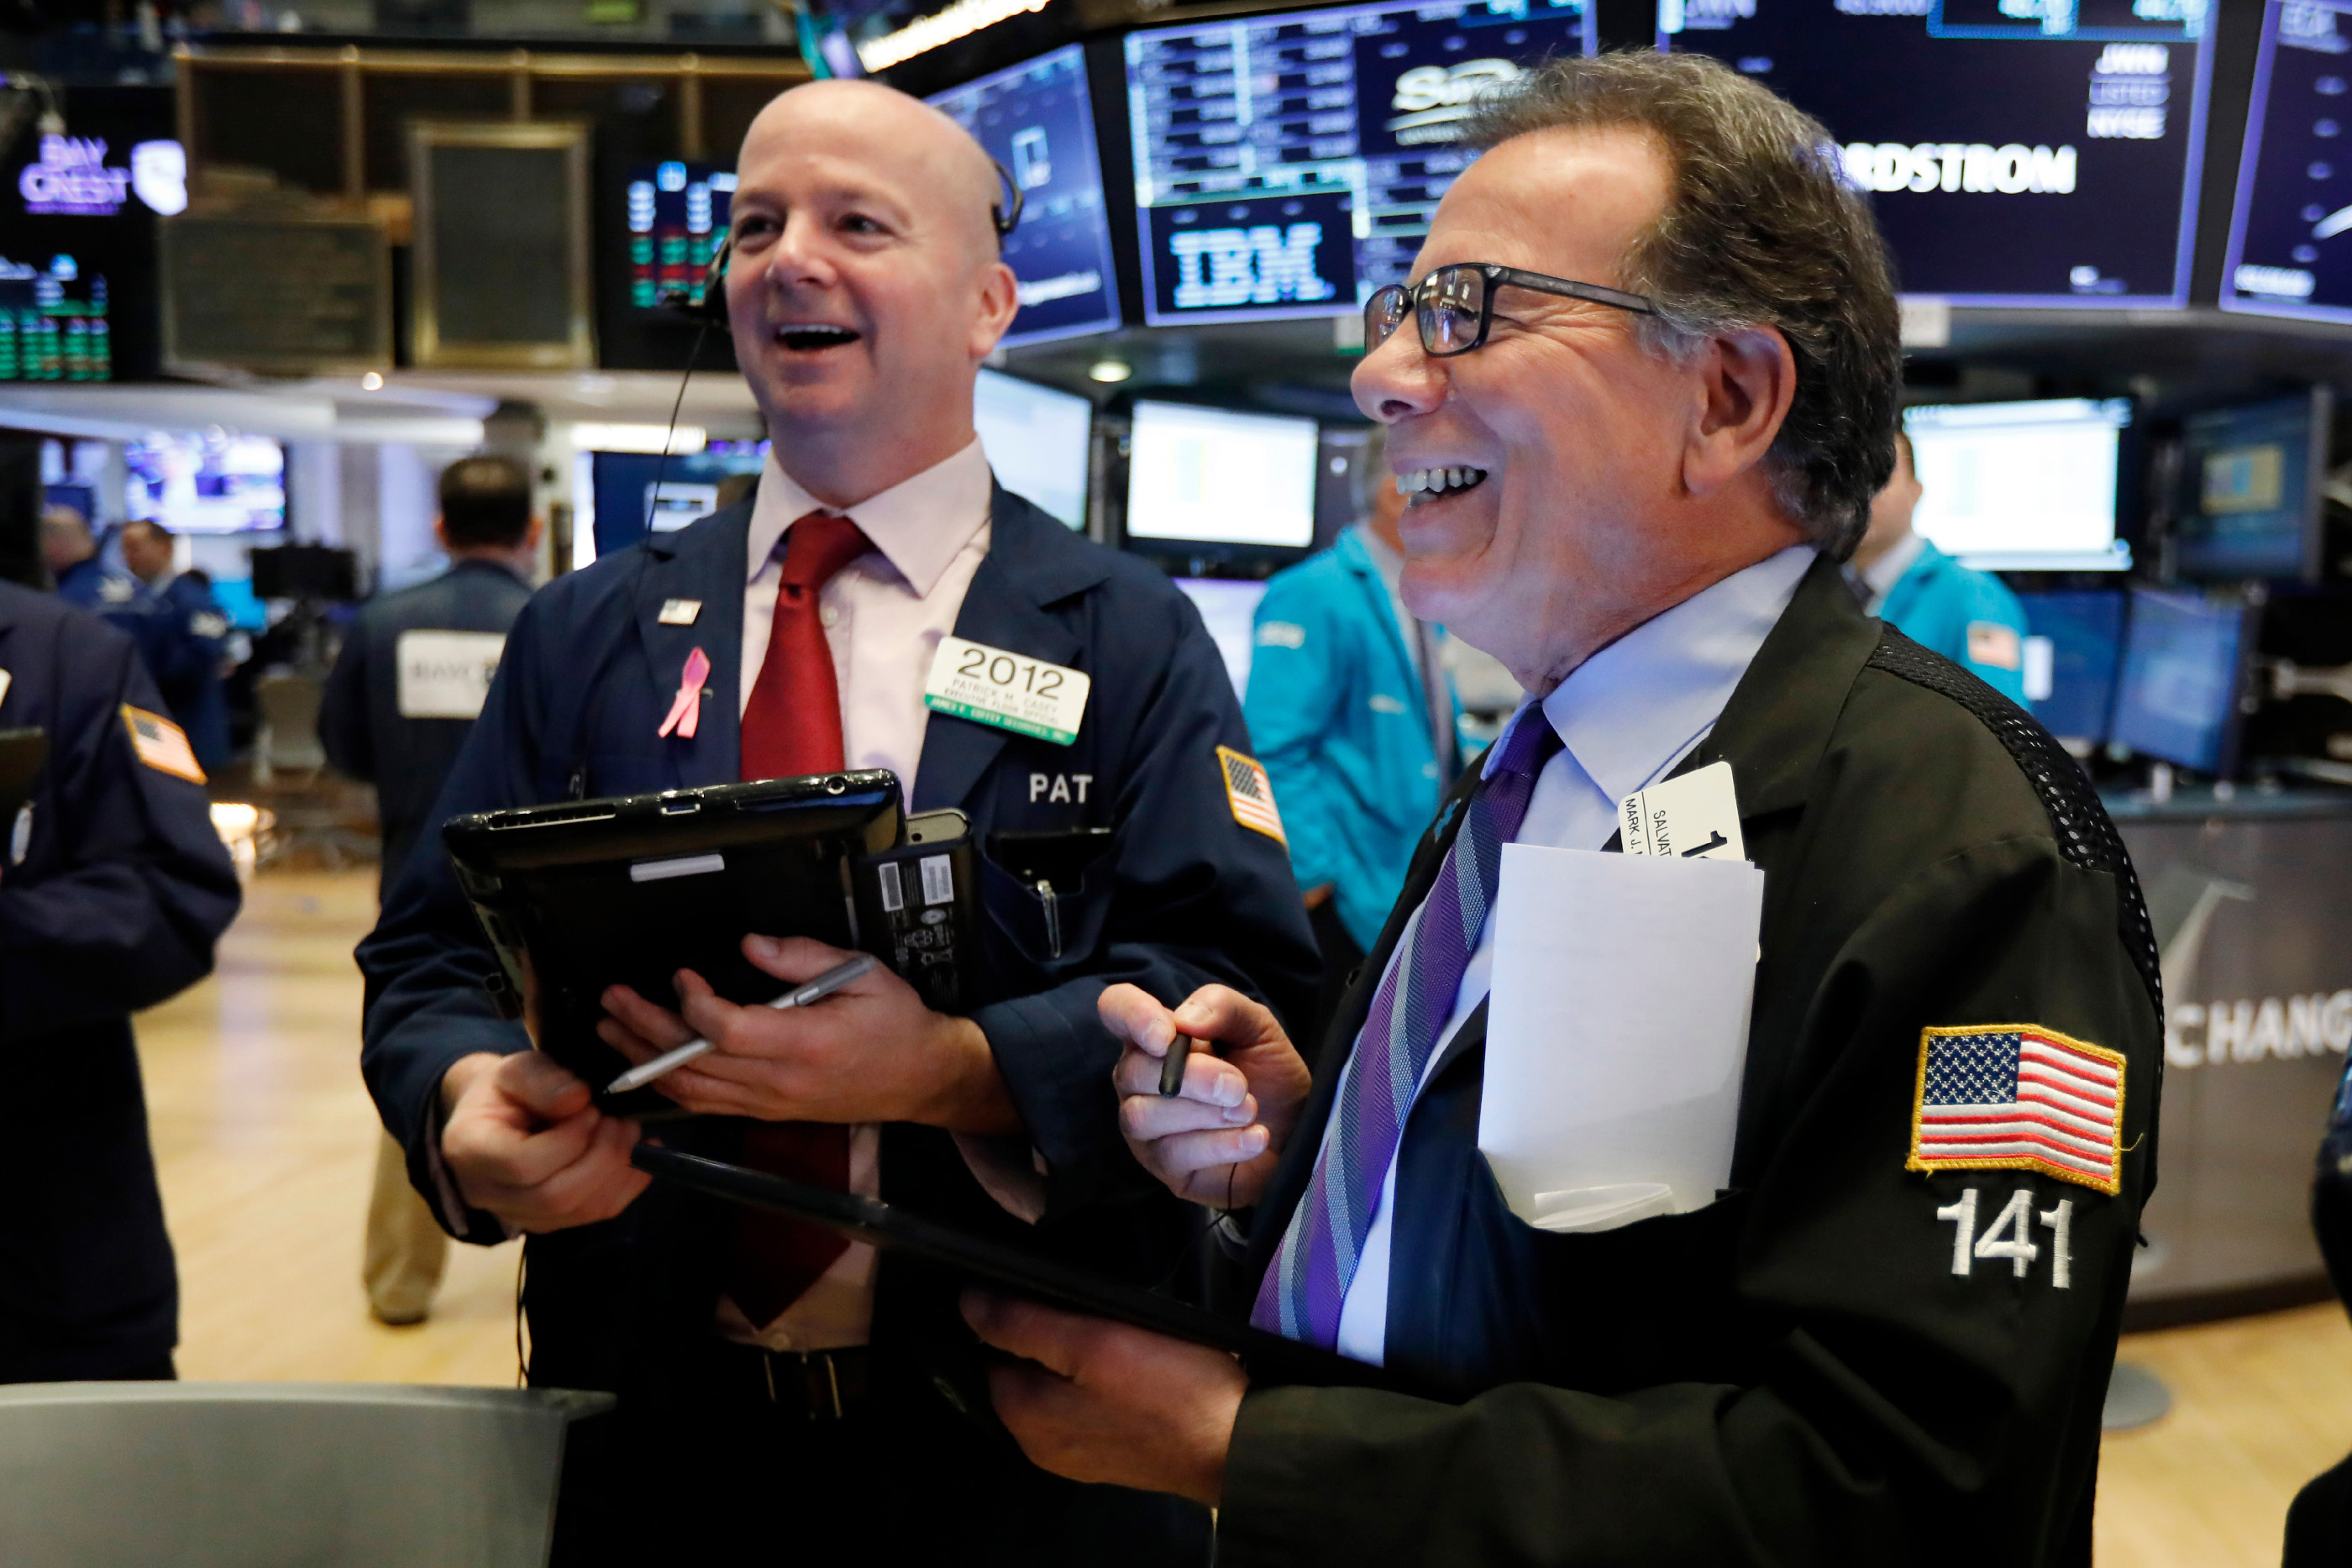 The Stock Market Is Having Its Strongest Start in 21 Years. Here’s What It Could Mean for the Rest of 2019